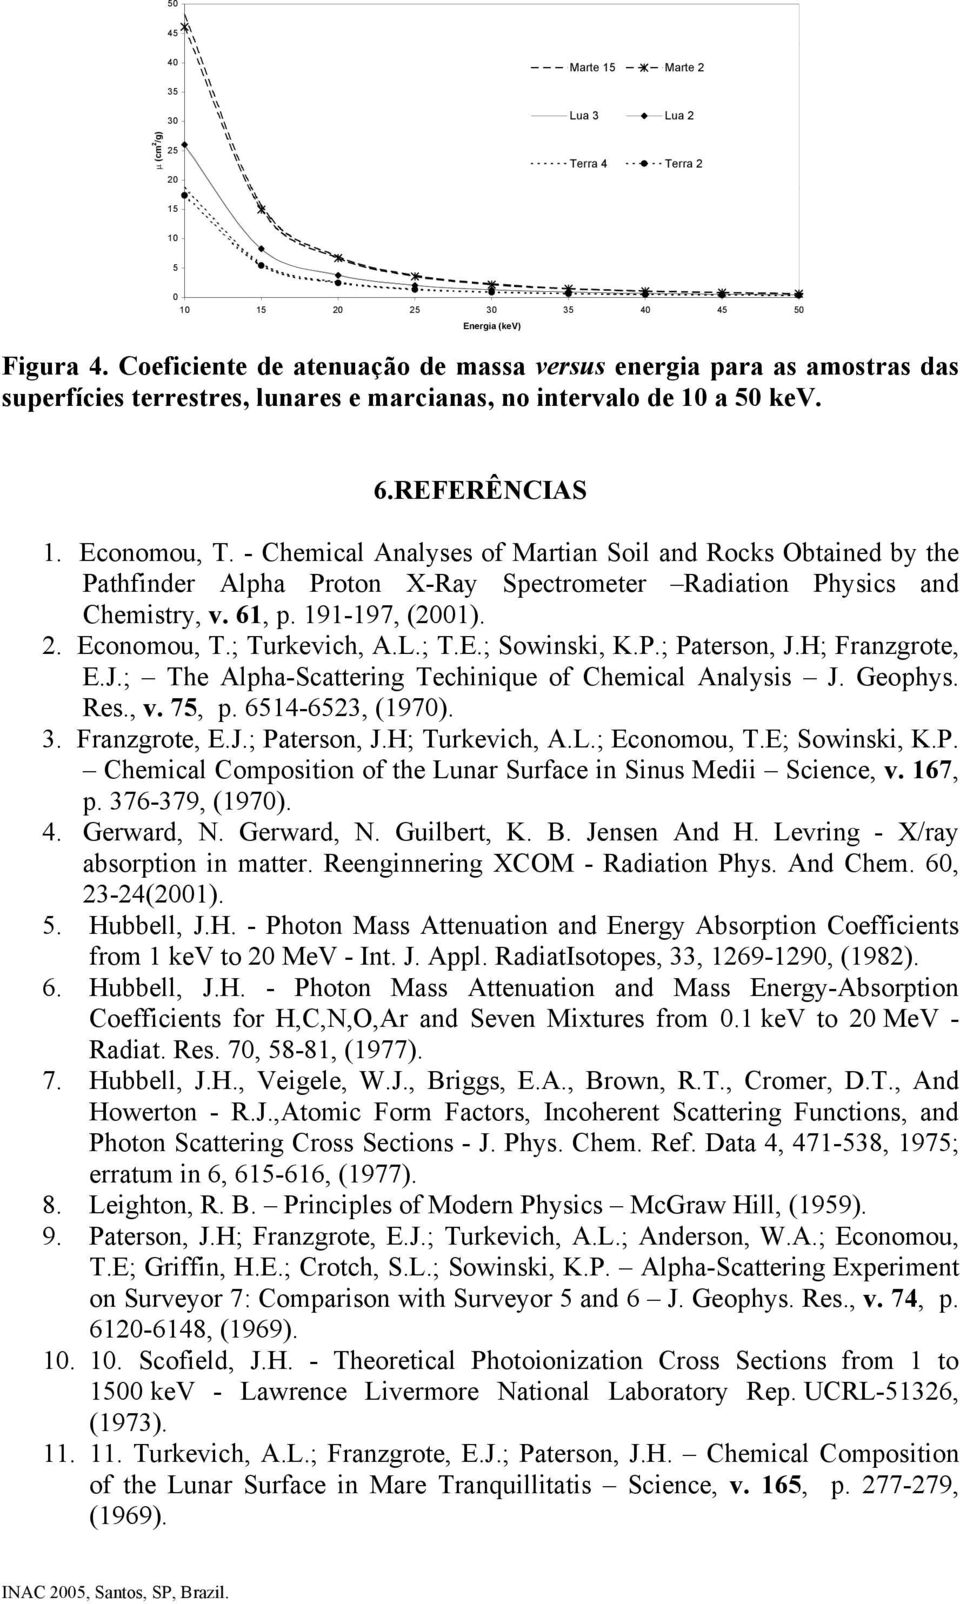 - Chemical Analyses of Martian Soil and Rocks Obtained by the Pathfinder Alpha Proton X-Ray Spectrometer Radiation Physics and Chemistry, v. 61, p. 191-197, (21). 2. Economou, T.; Turkevich, A.L.; T.E.; Sowinski, K.